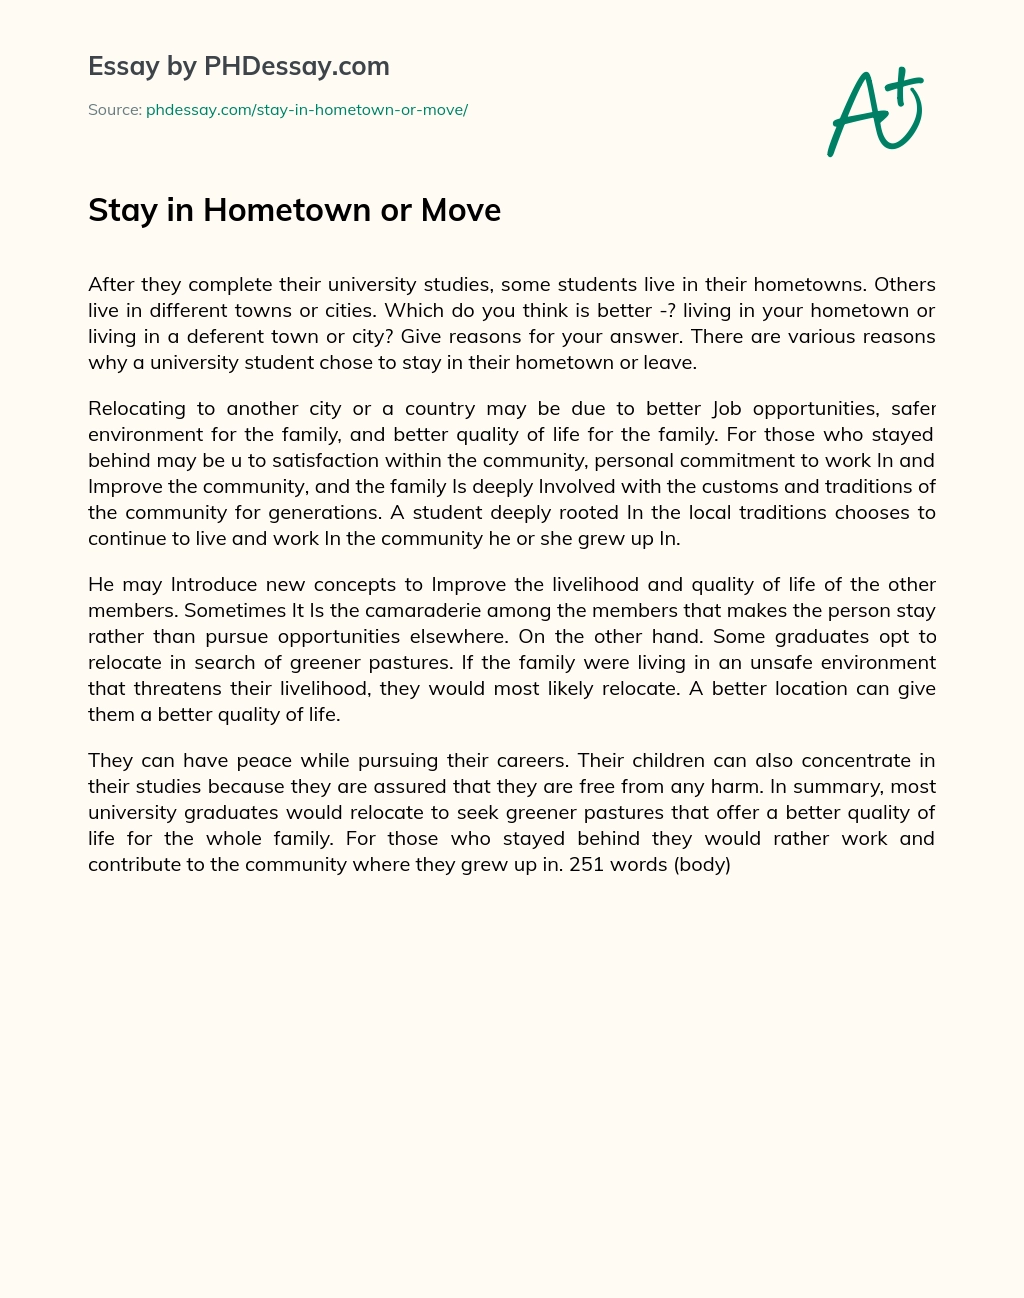 Stay in Hometown or Move essay